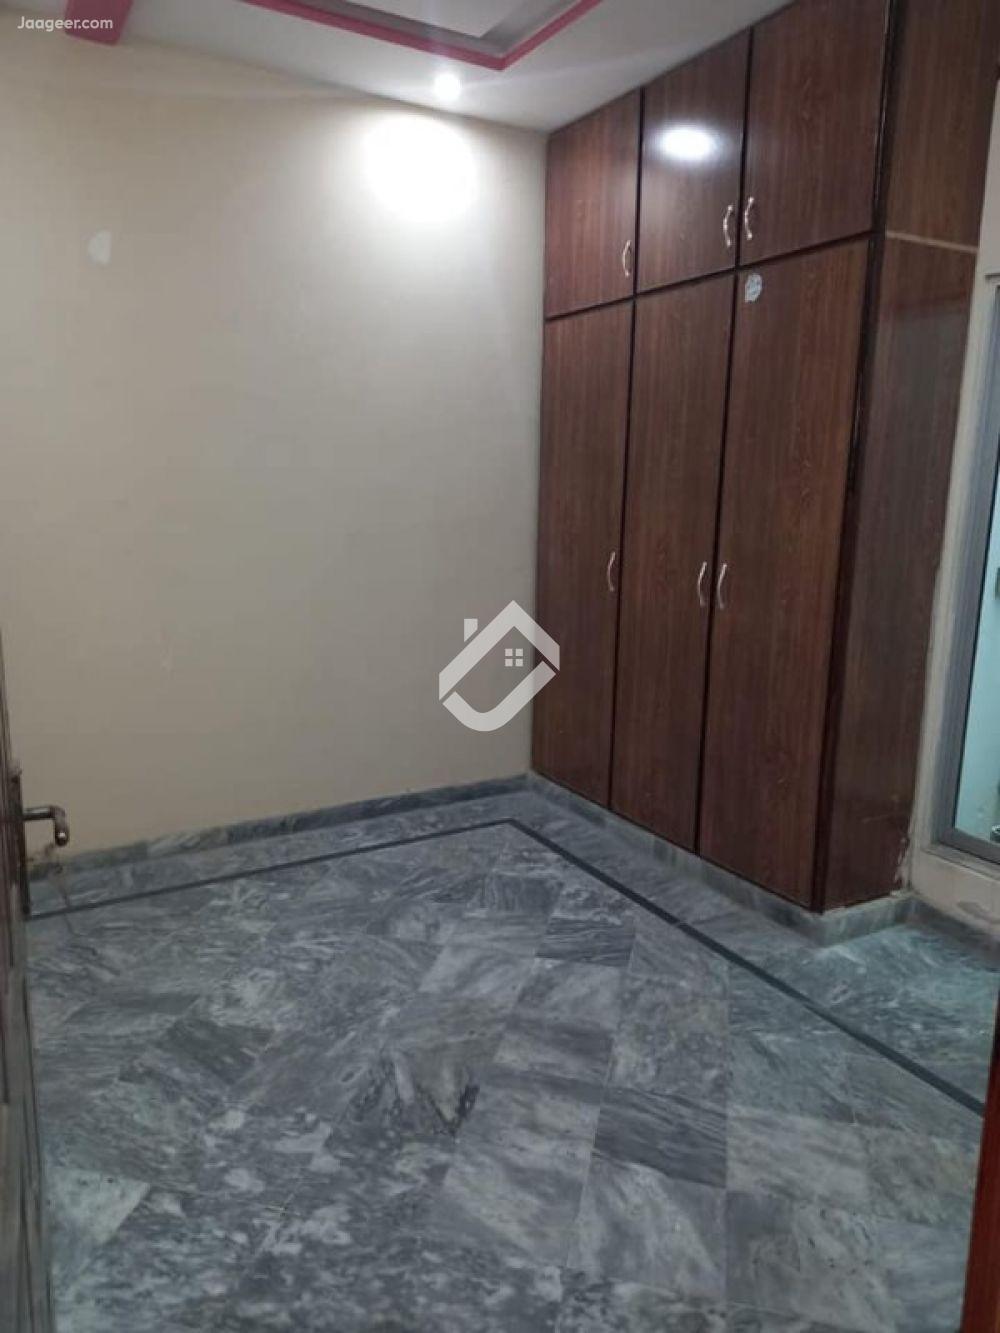 View  2.5 Marla Single Storey House Is Available For Sale At Ferozpur Road  in Ferozpur Road, Lahore